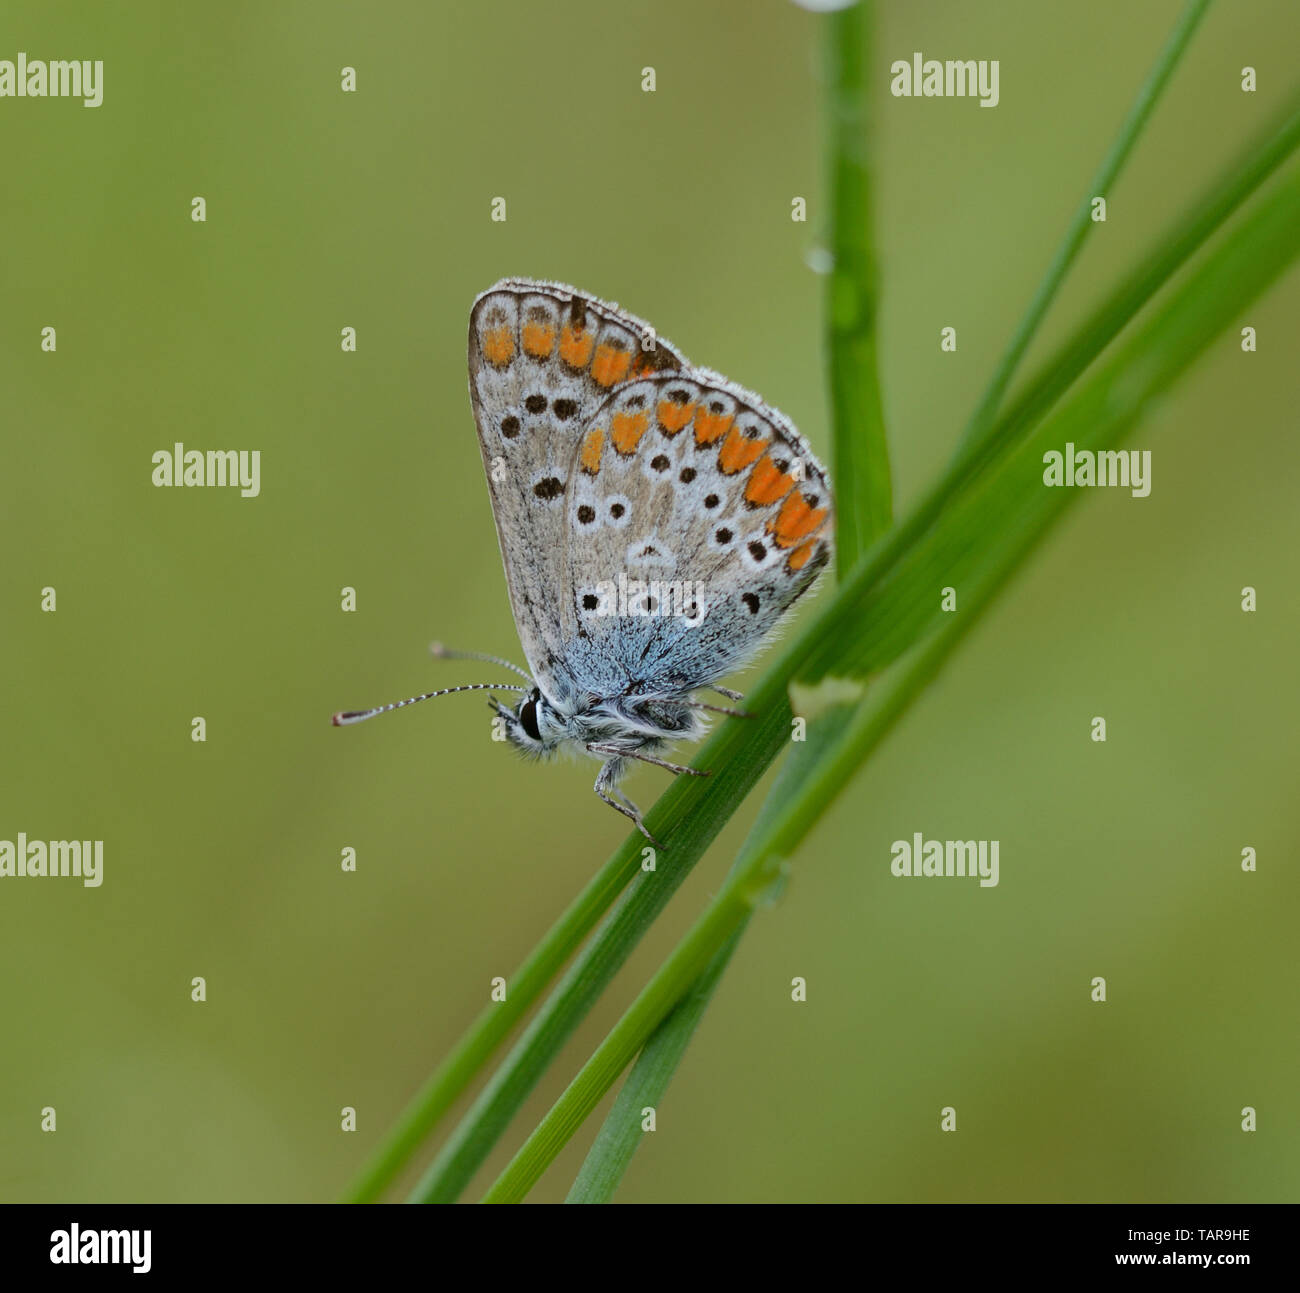 close-up of Common Blue butterfly over a blade of grass Stock Photo